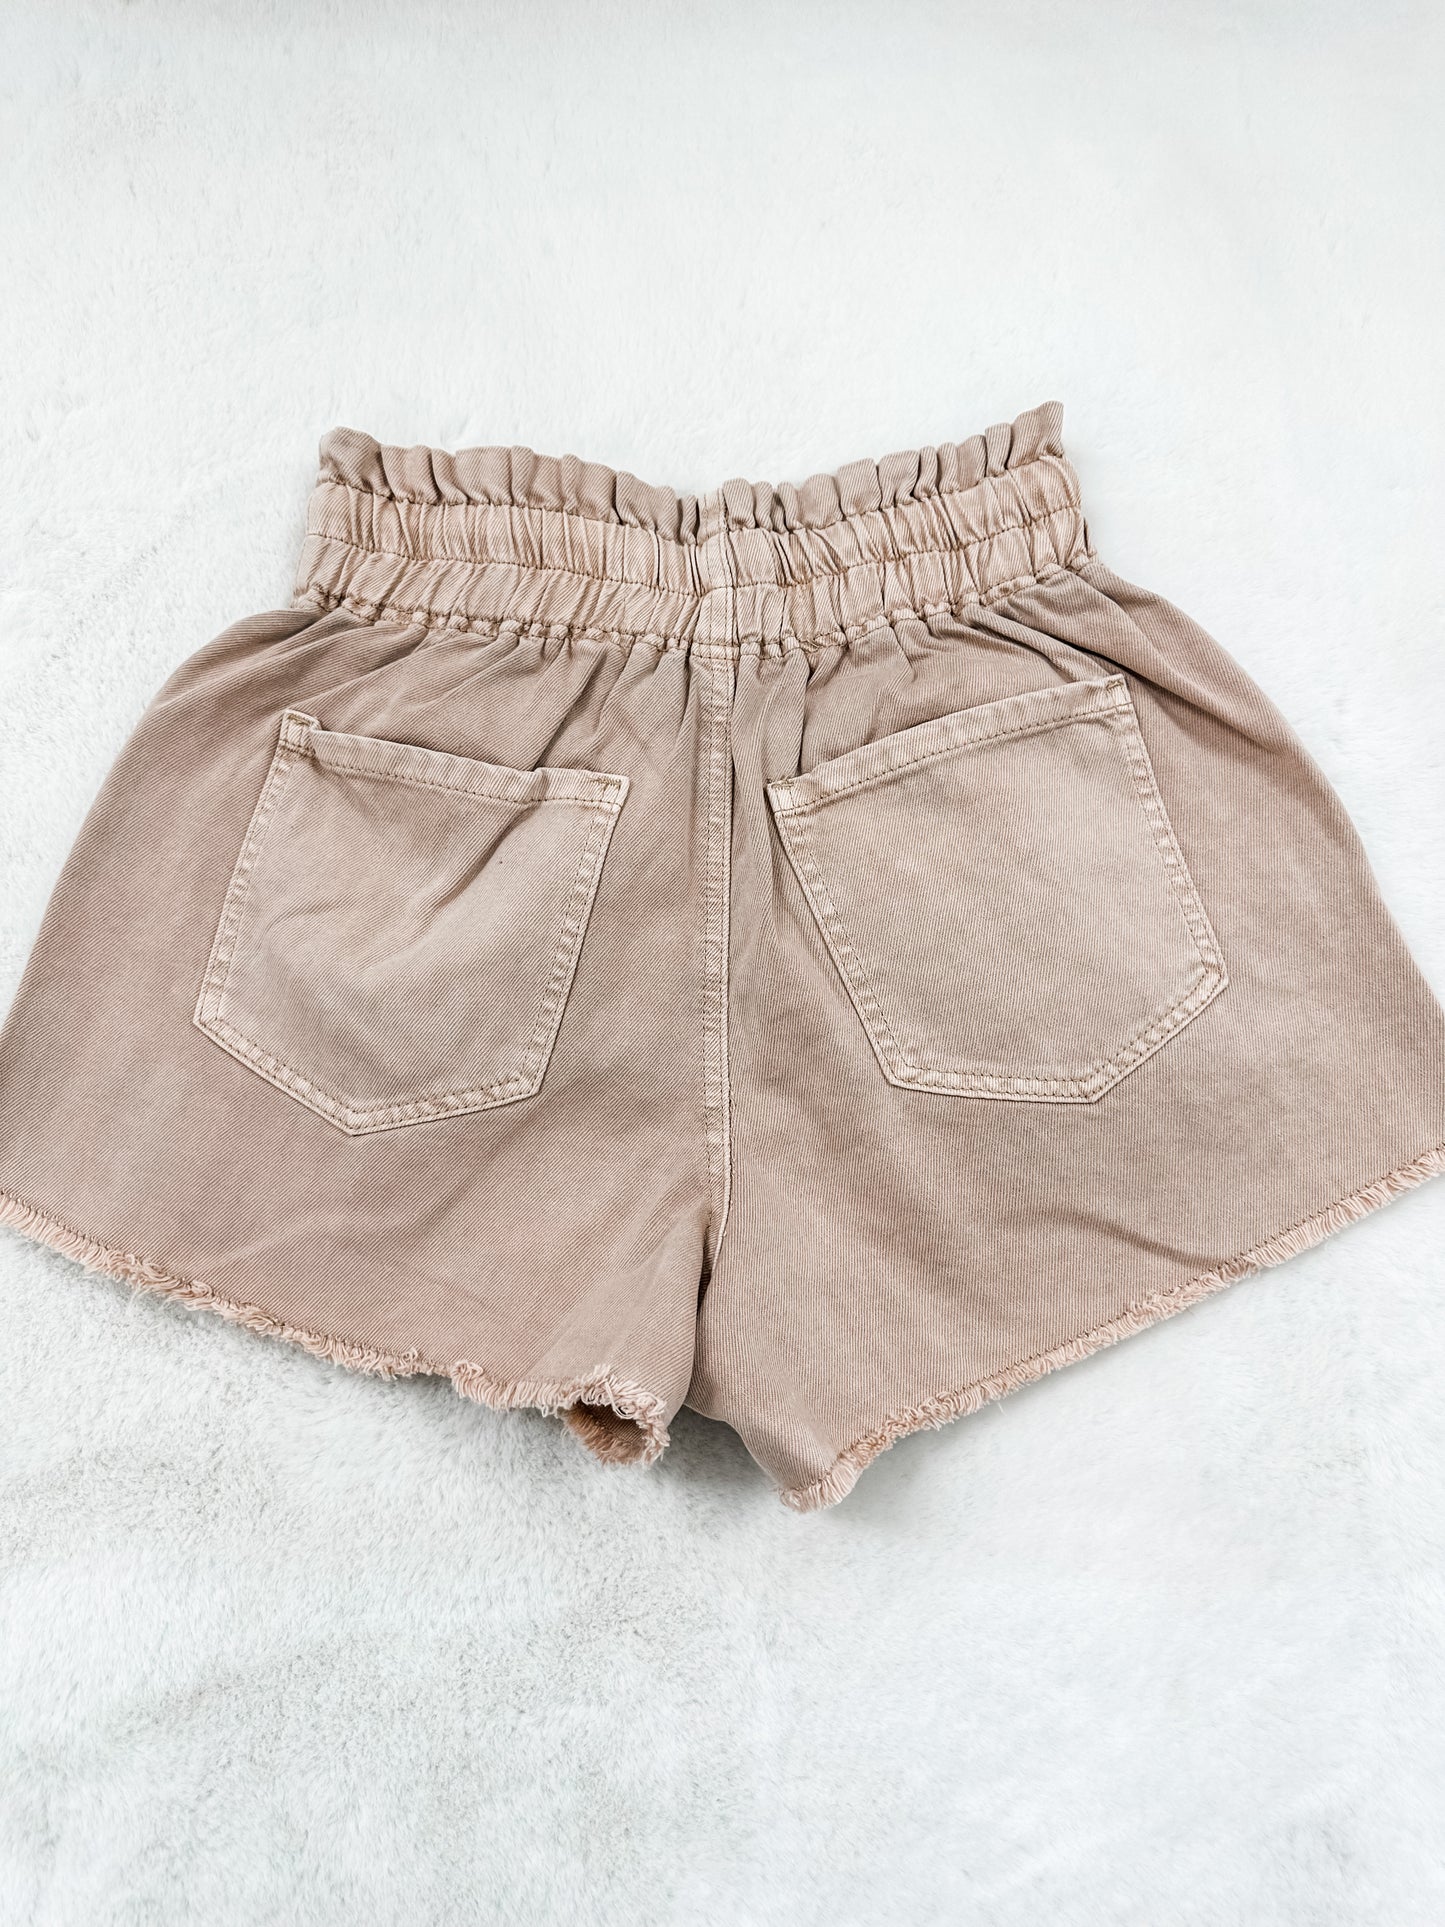 Lost in Paradise Pink Shorts